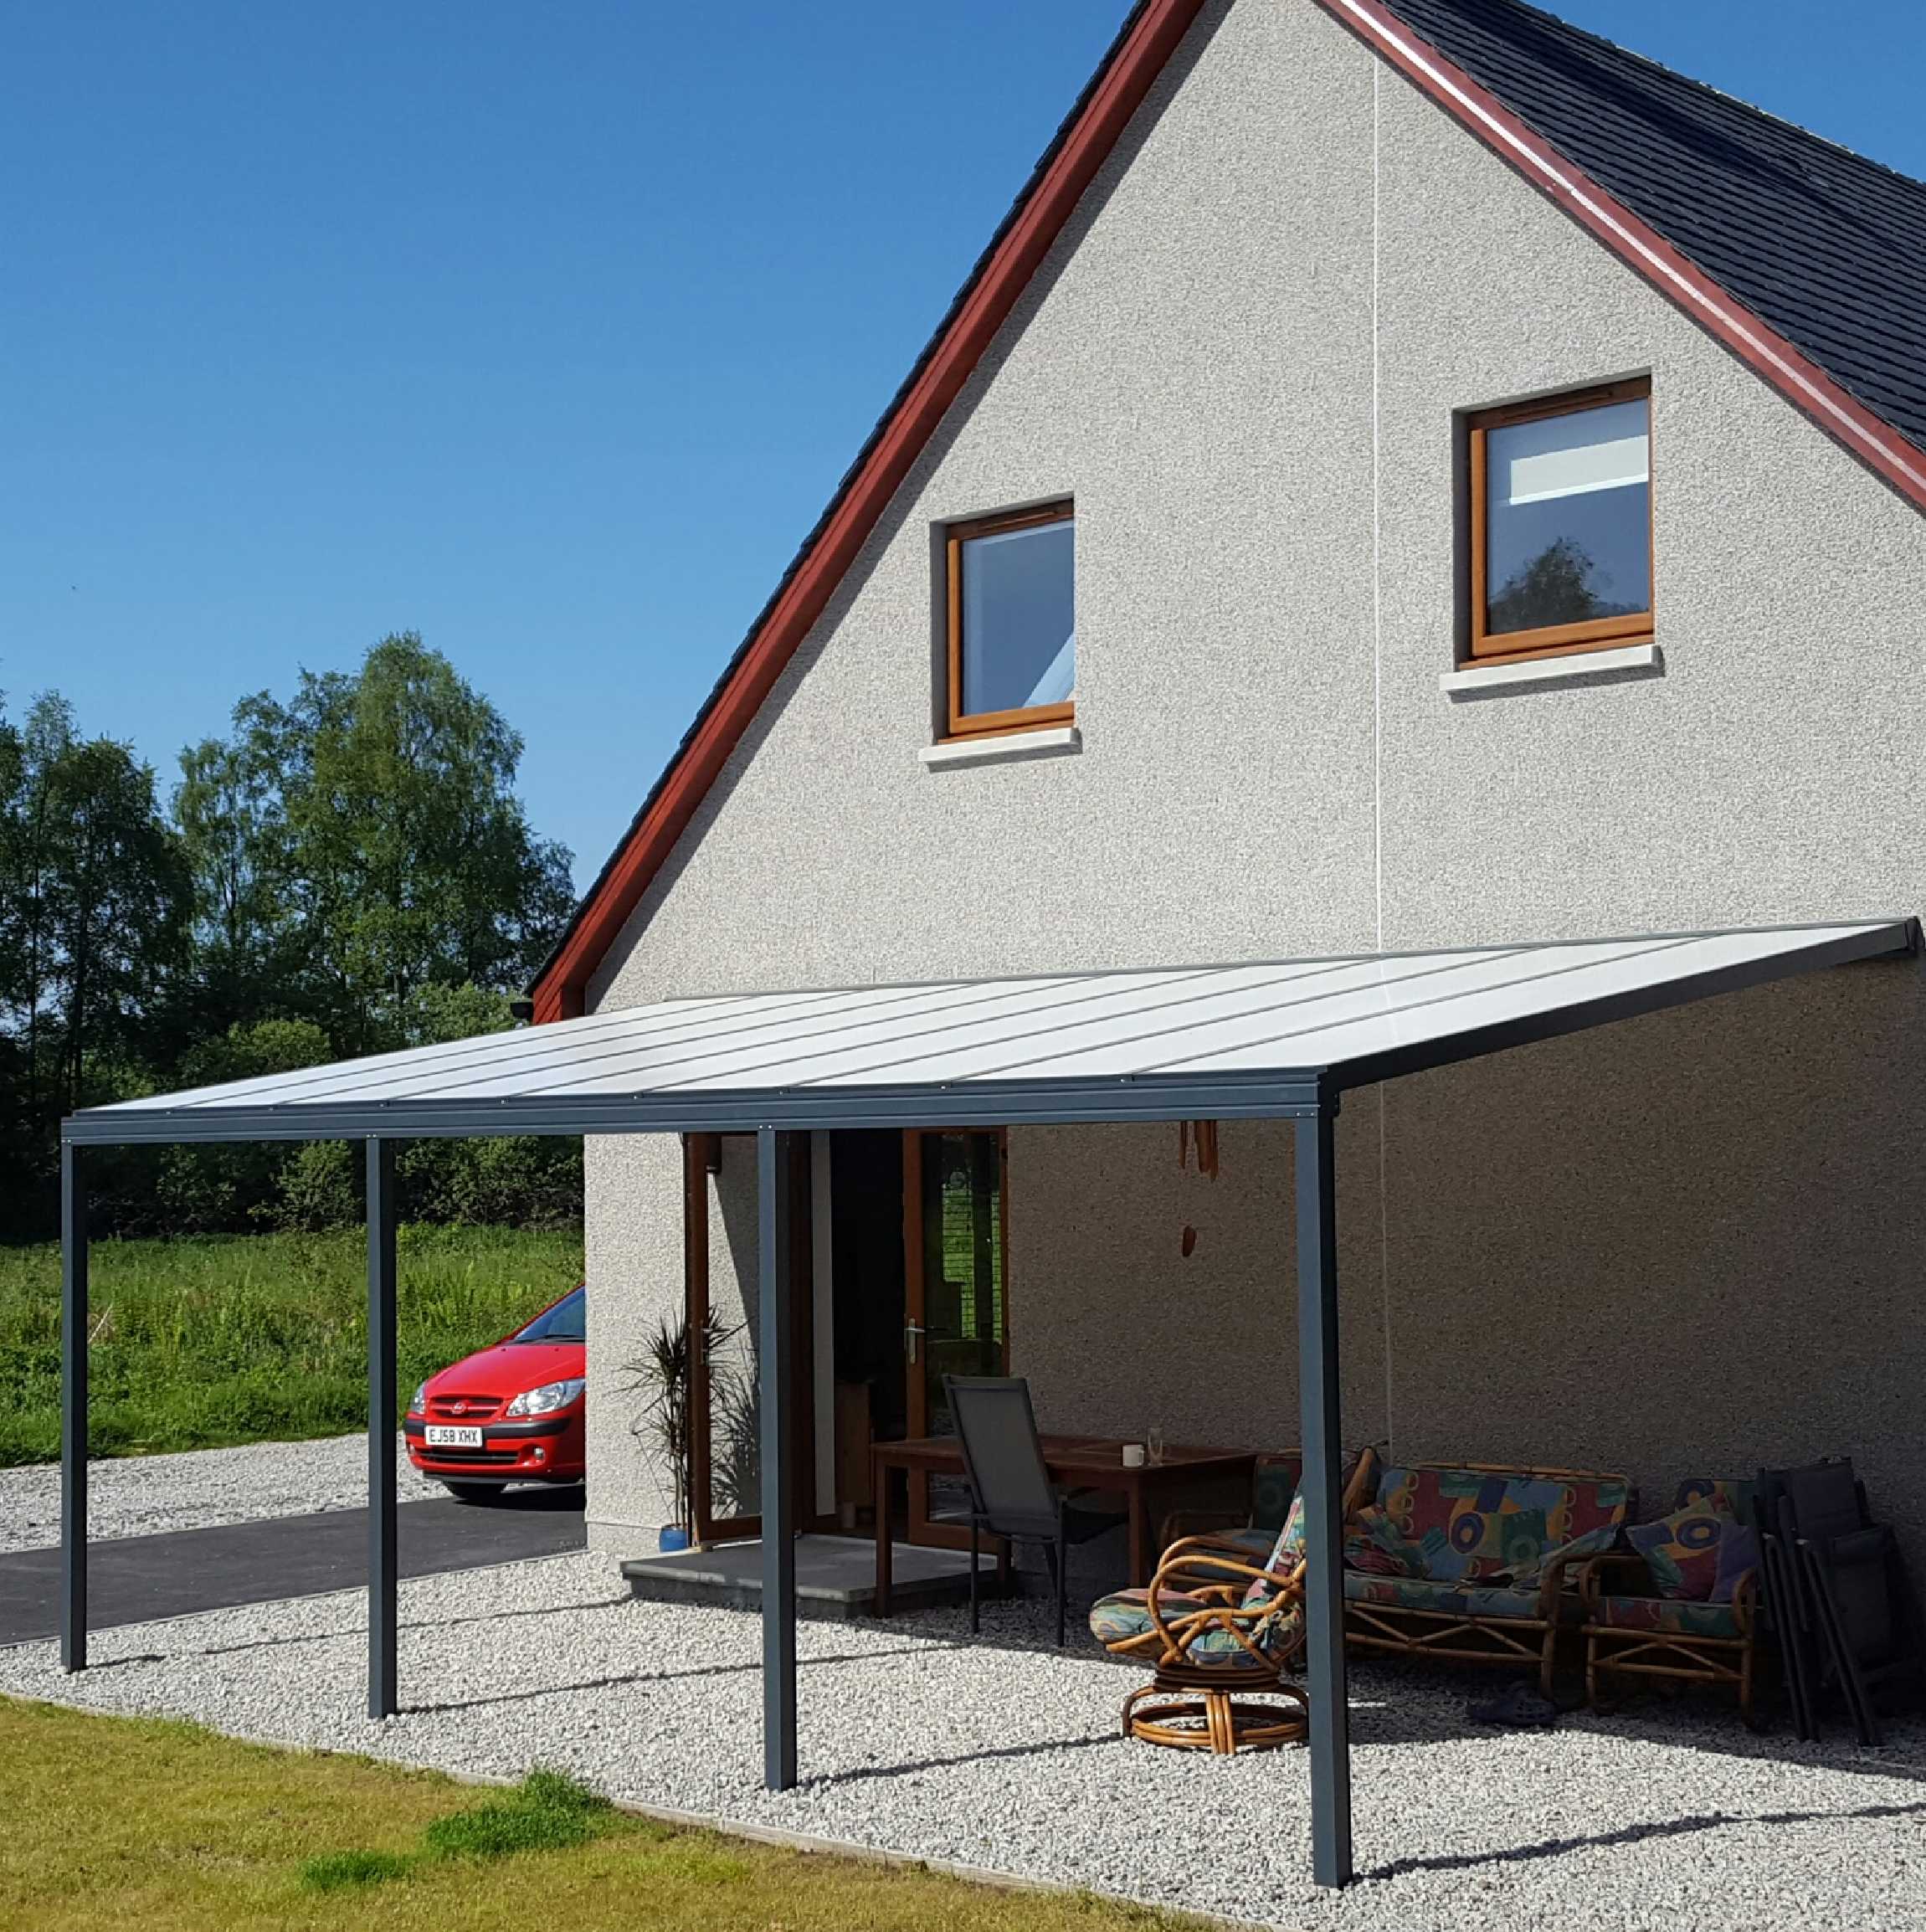 Great selection of Omega Smart Lean-To Canopy, Anthracite Grey, 16mm Polycarbonate Glazing - 7.4m (W) x 4.5m (P), (4) Supporting Posts